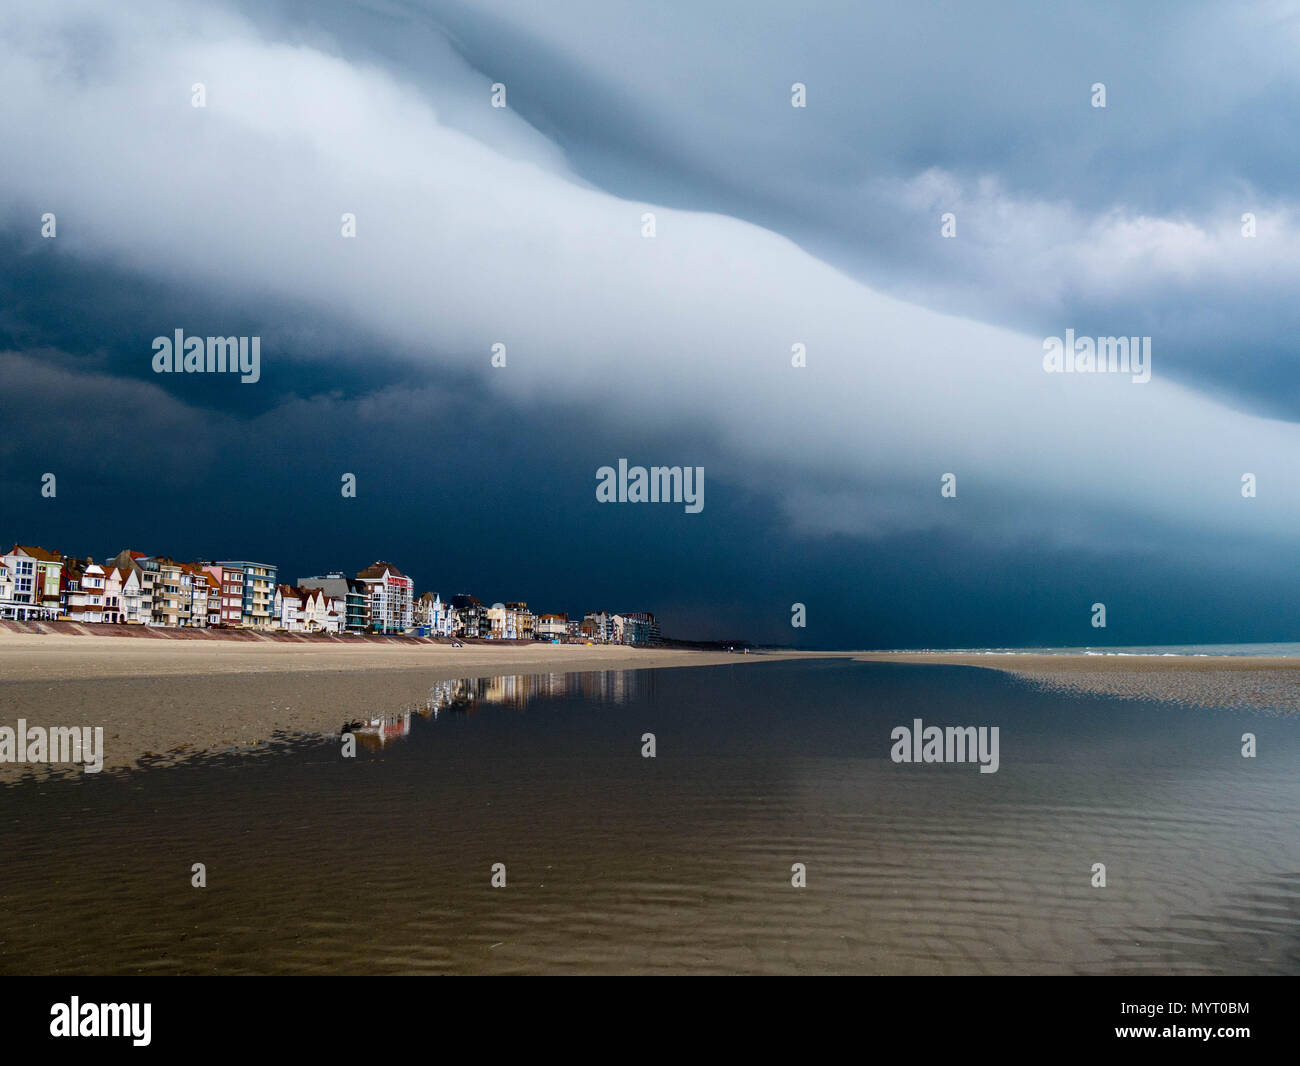 A thunderstorm approaching the beachfront buildings in Bray-Dunes in northern France Stock Photo